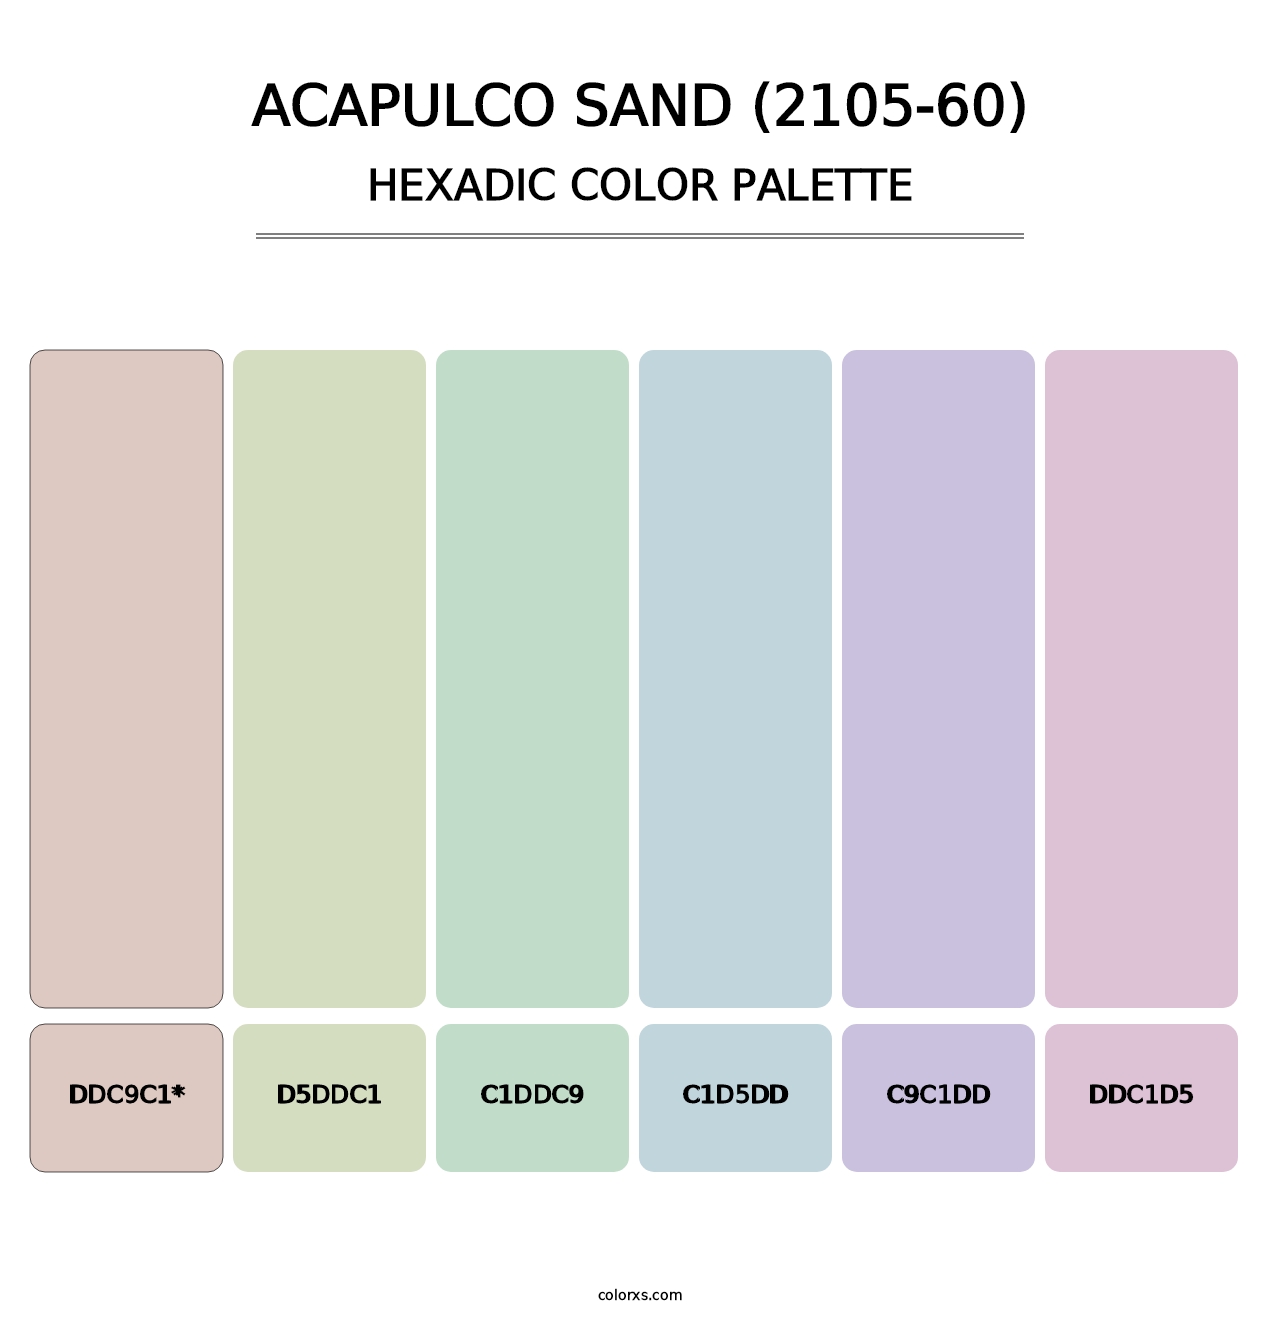 Acapulco Sand (2105-60) - Hexadic Color Palette